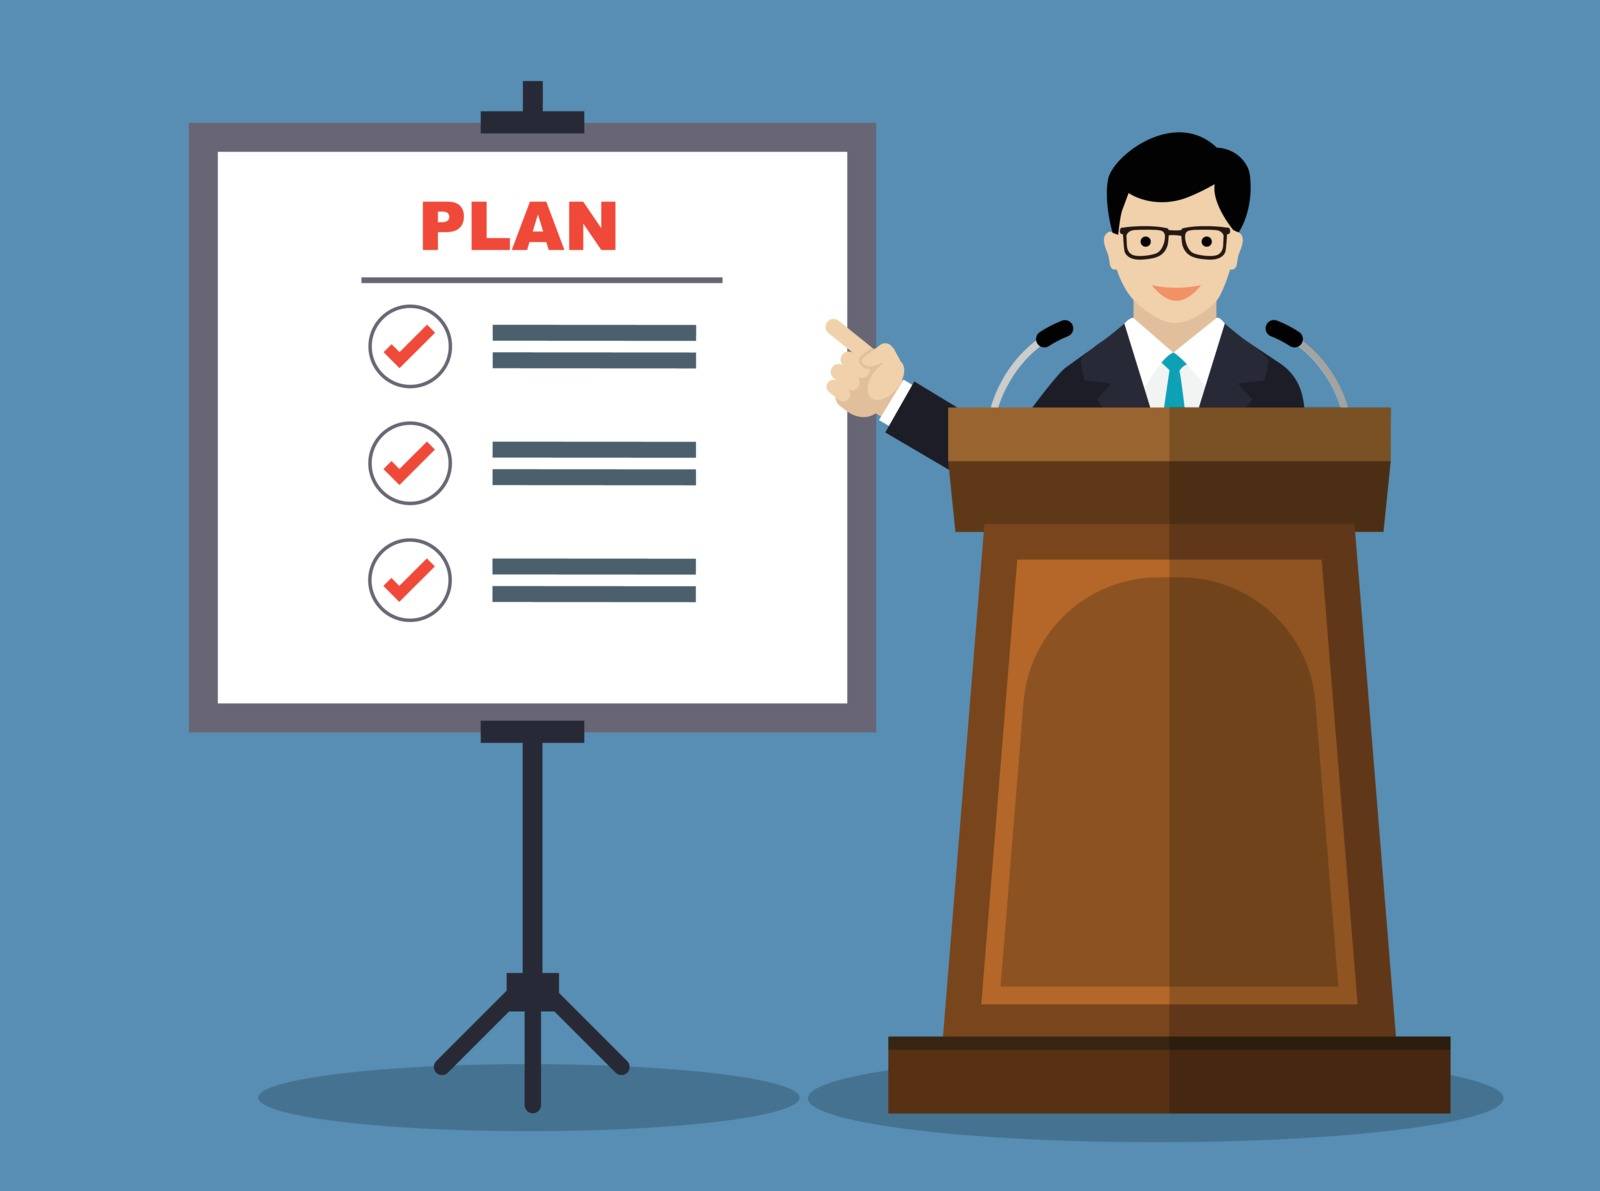 Businessmen presentation of business plan, man in formal sut giving speech on podium about business plan, for business concept-Vector Flat Design Illustration.